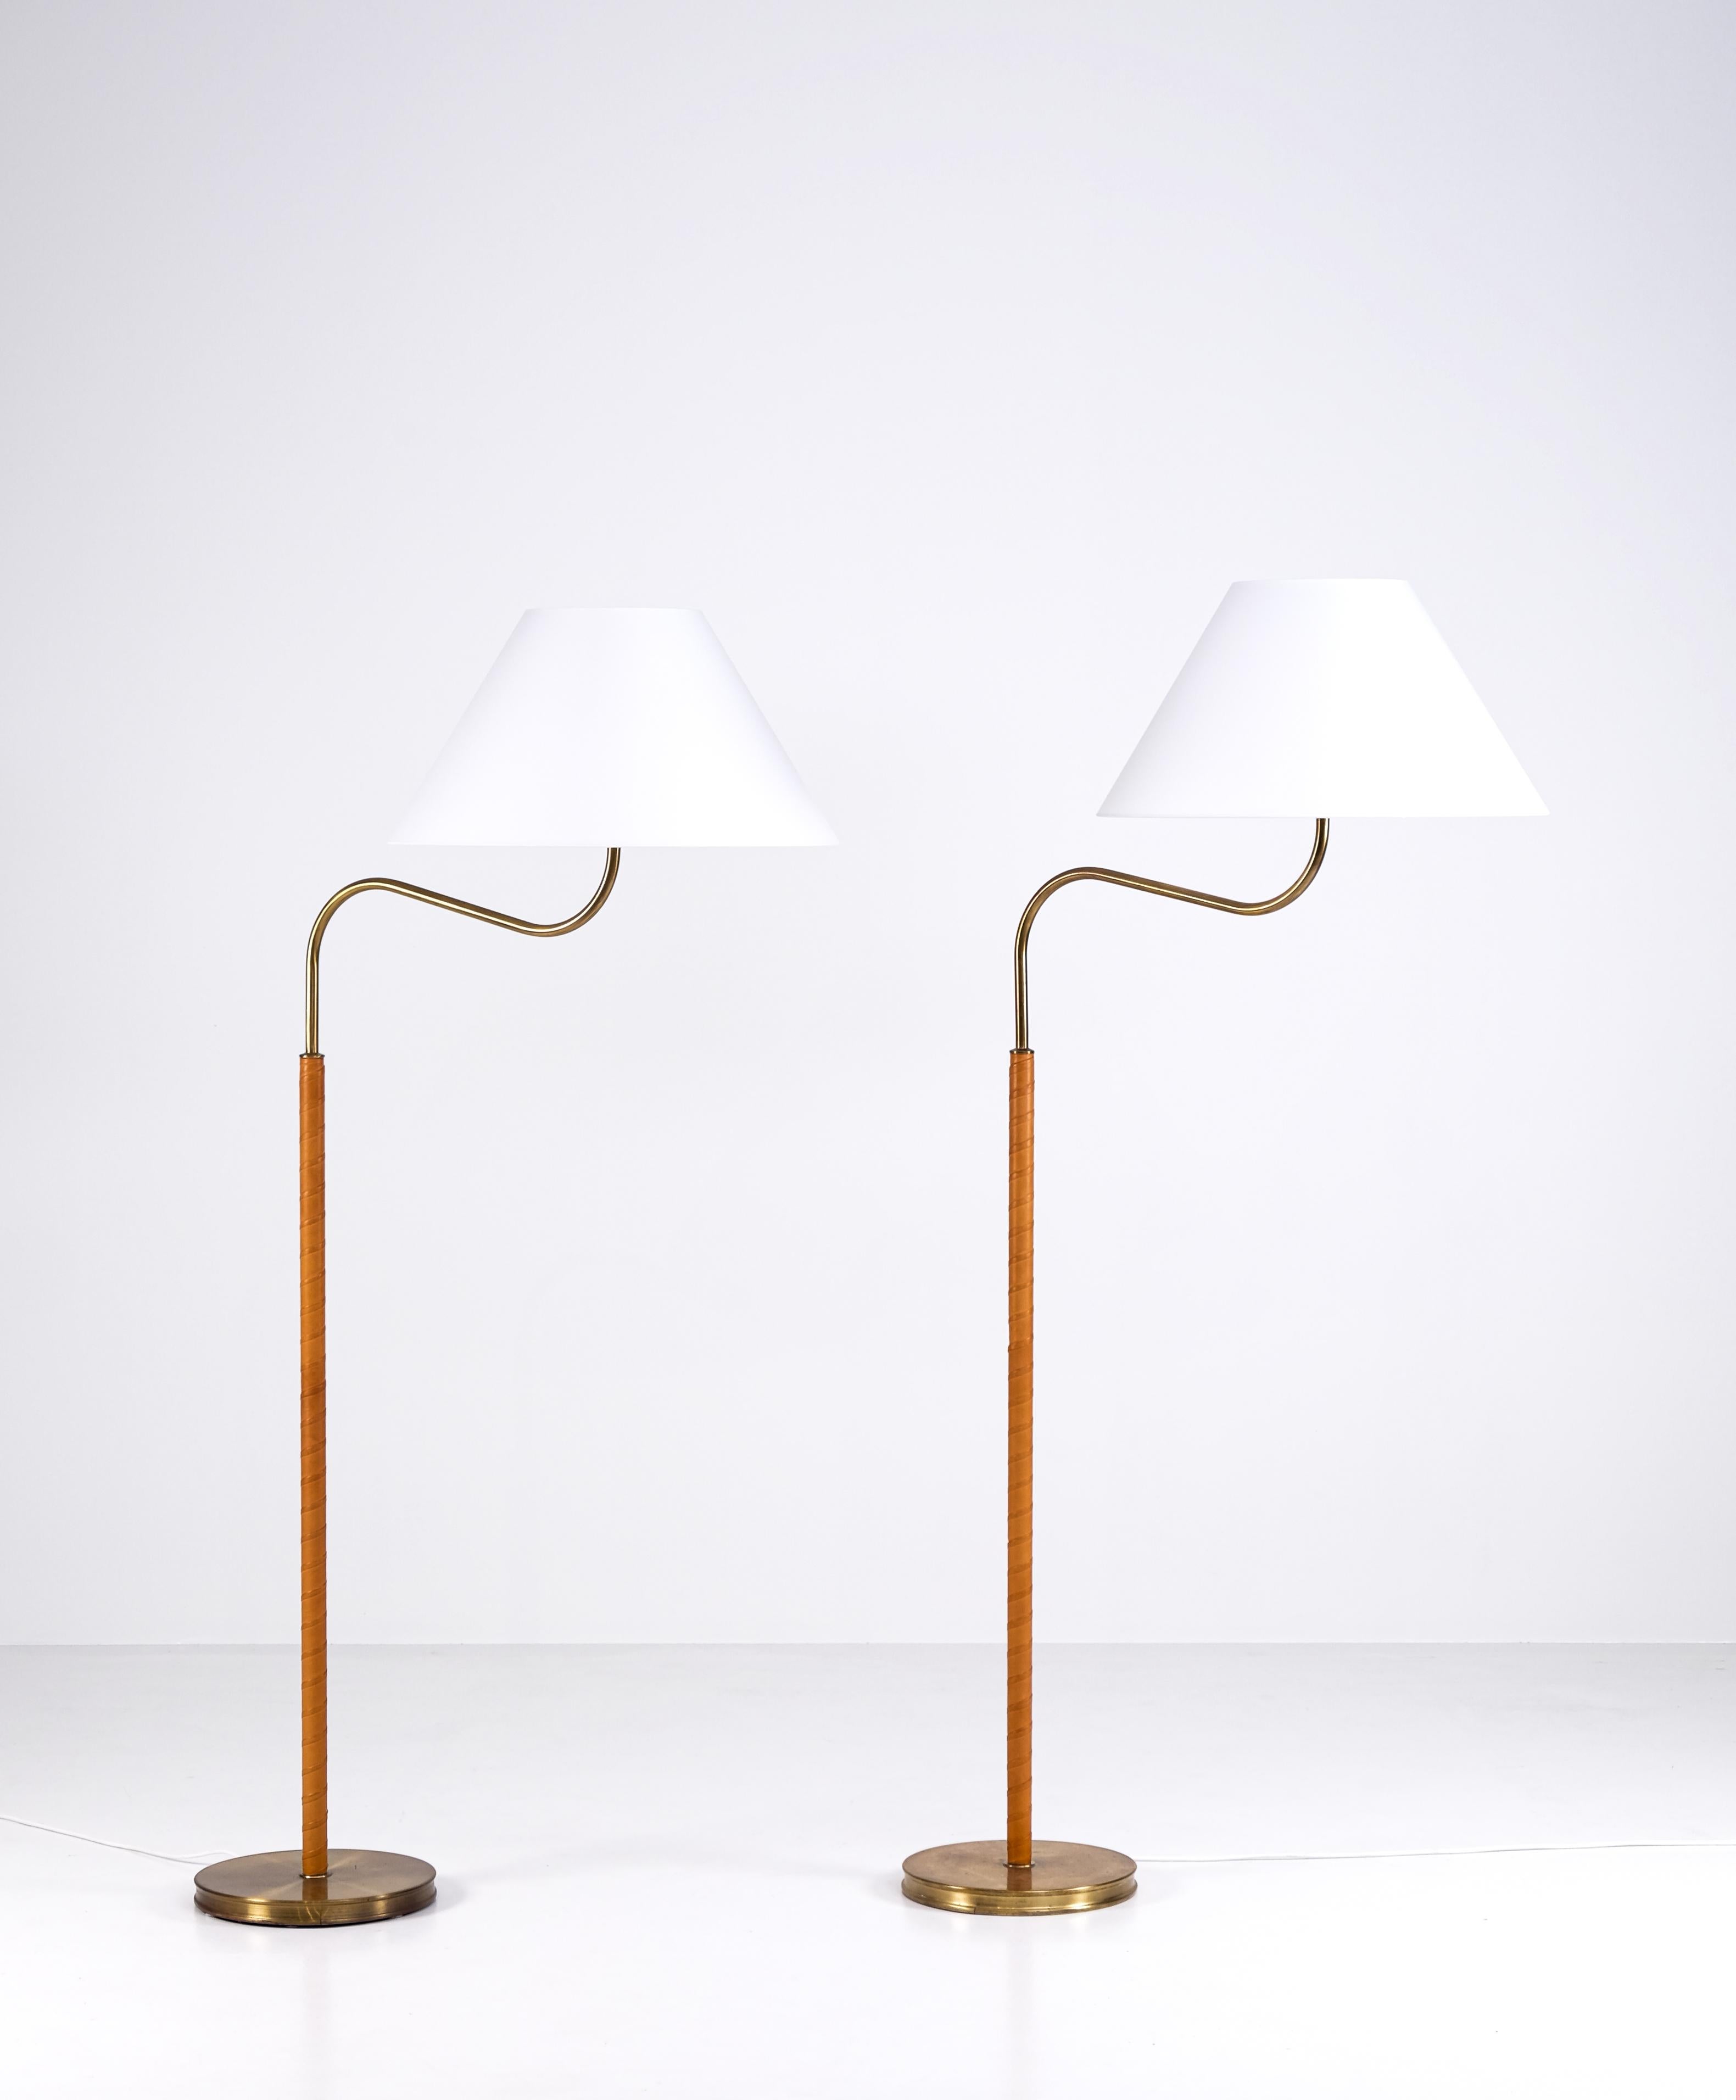 Designed by Josef Frank in 1939, this pair produced circa 1960s. 
New leather and new original Svenskt tenn lampshades.